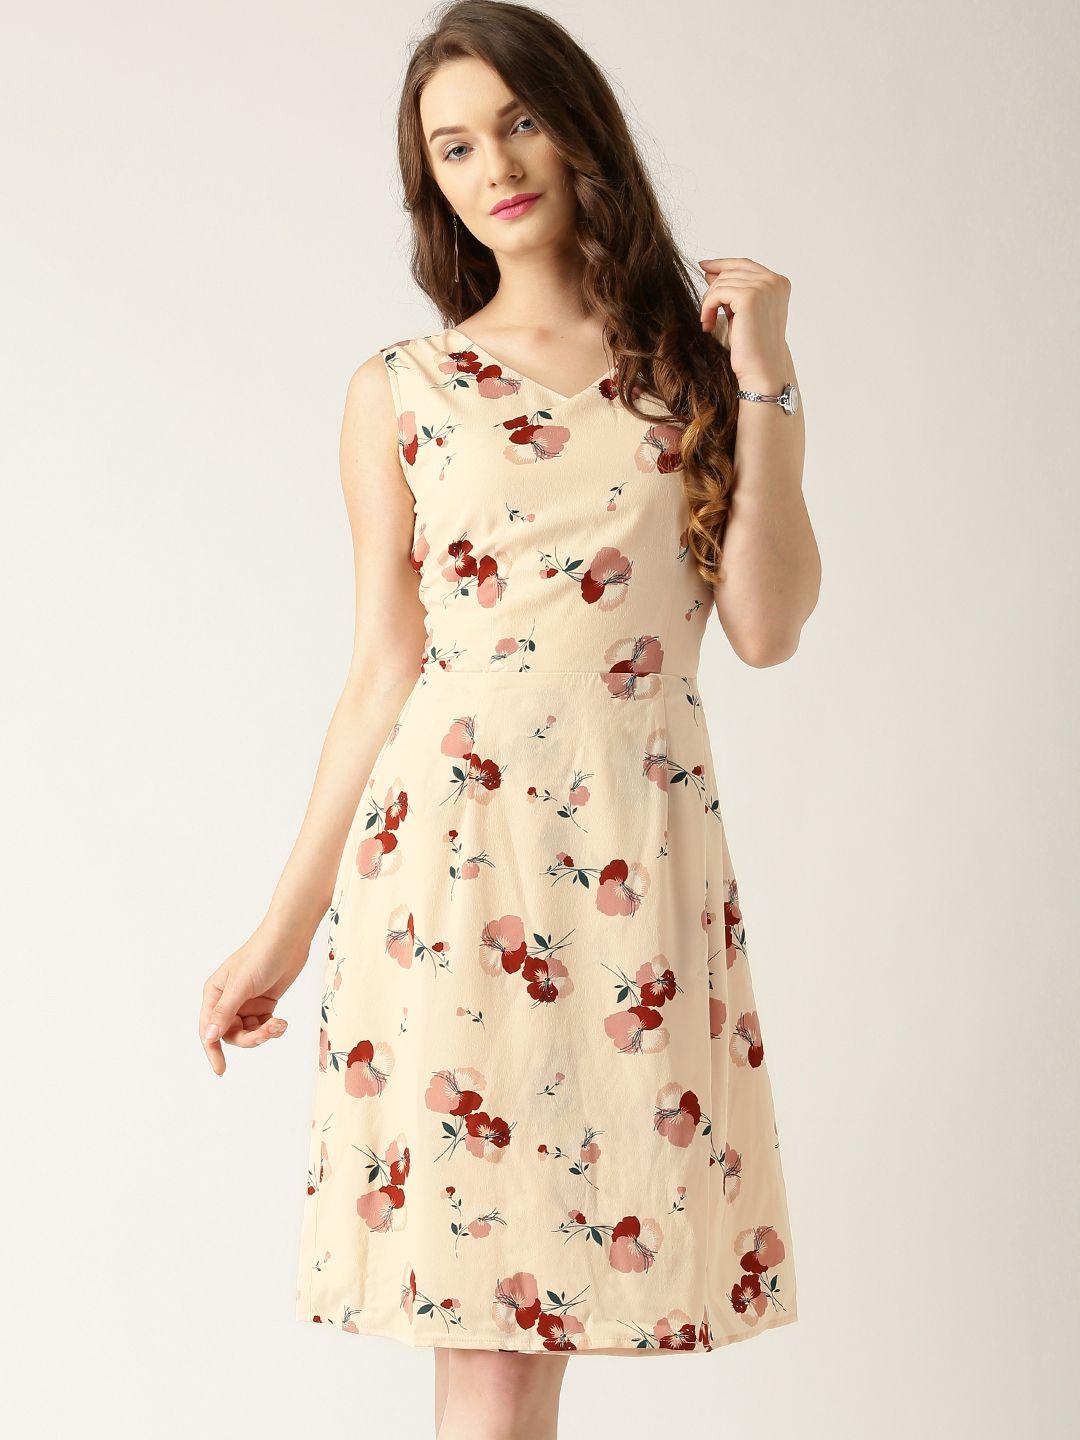 marie claire women peach-coloured printed layered fit & flare dress